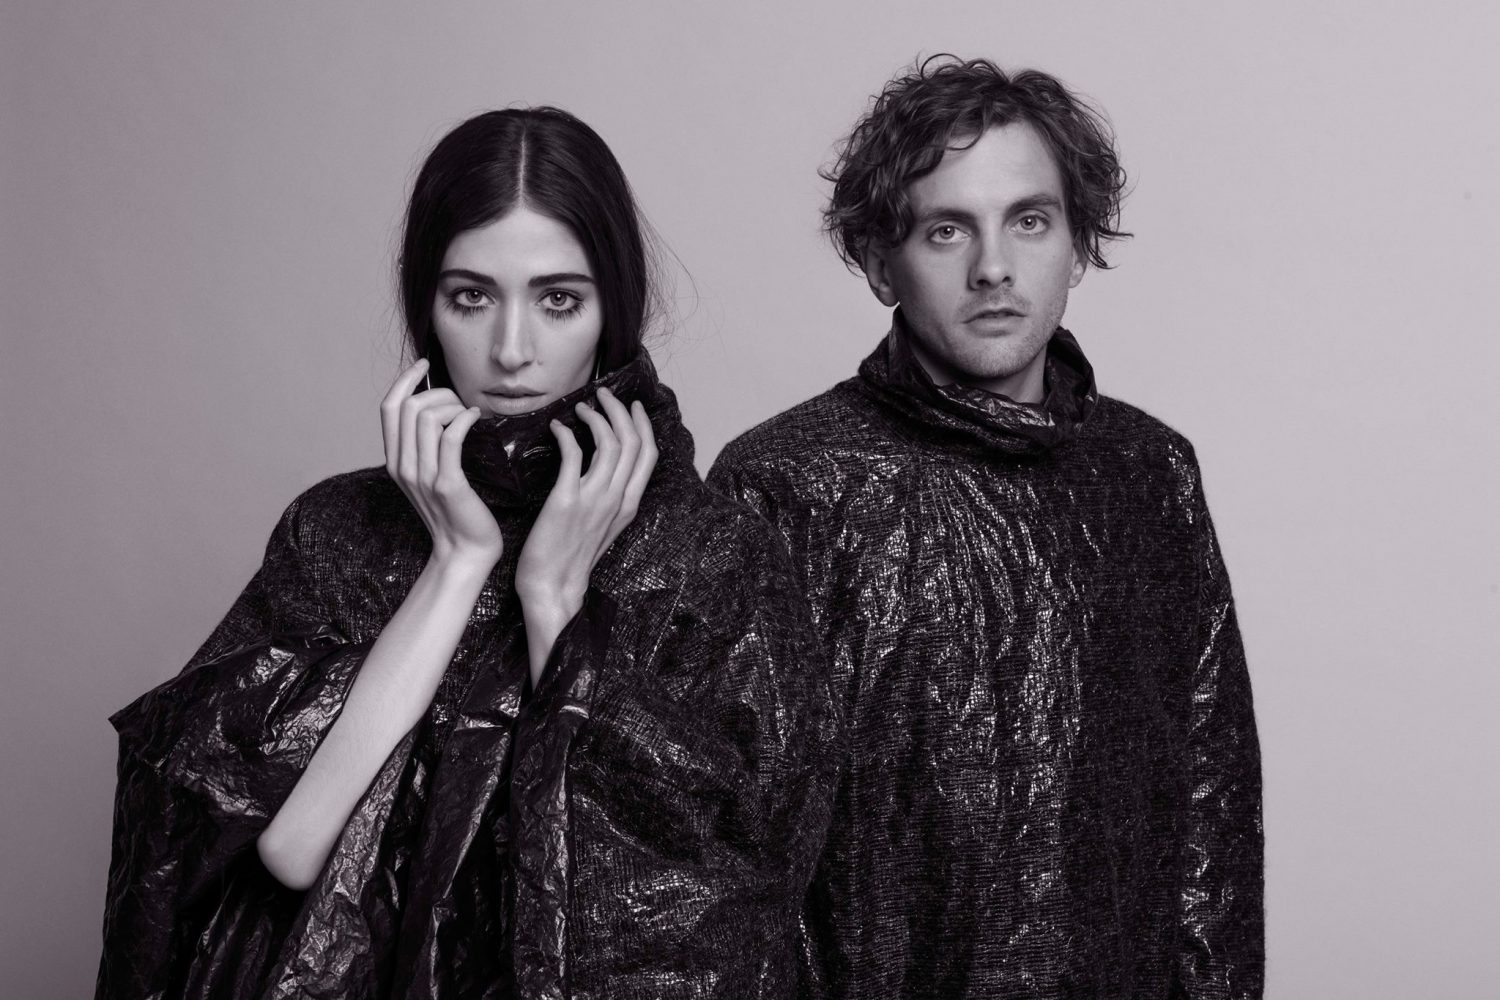 Chairlift+shimmers+at+Firebird